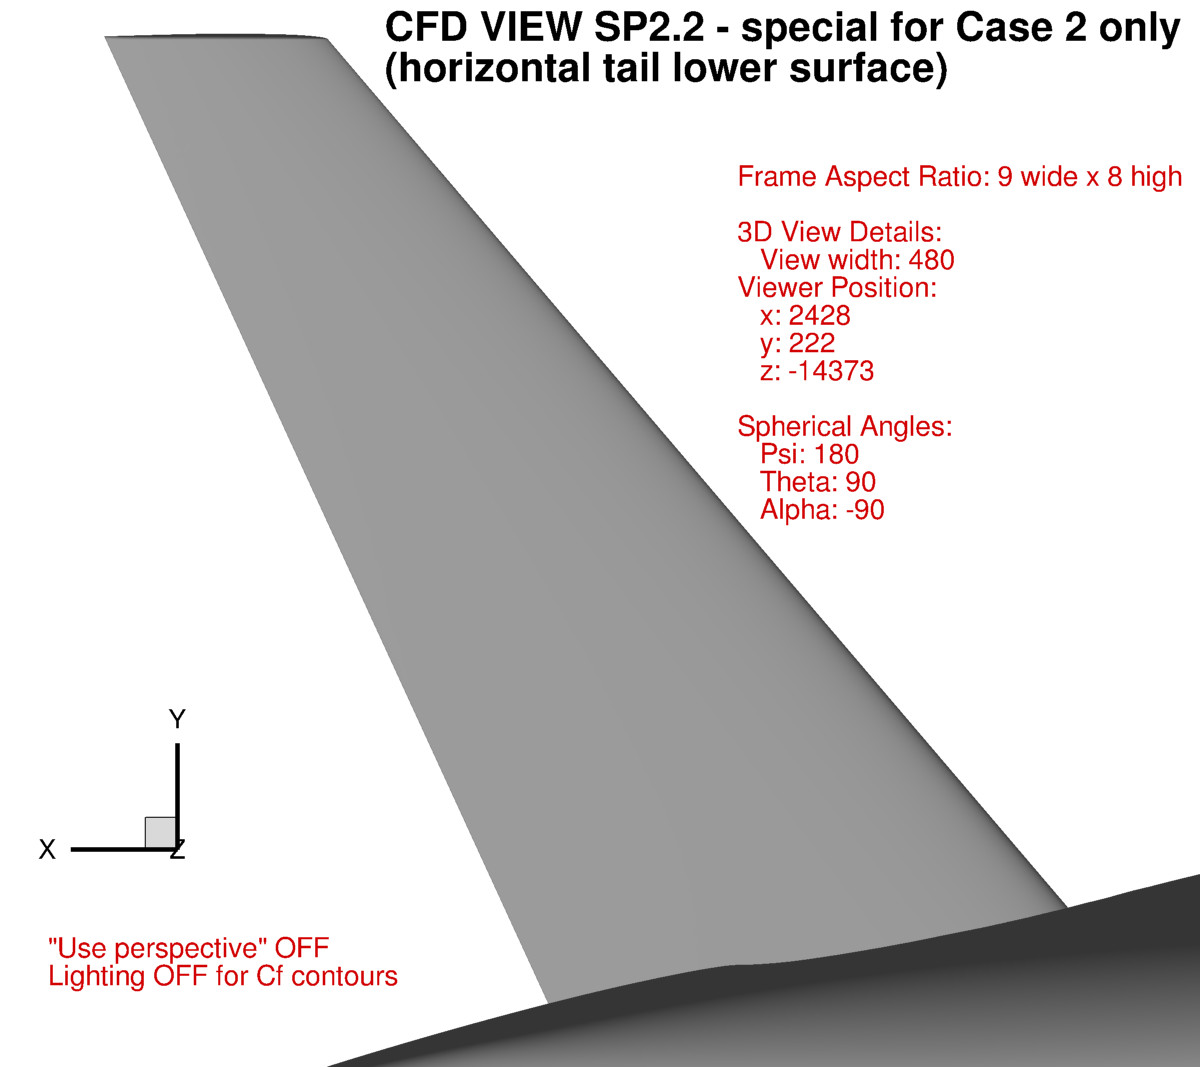 Example CFD view #SP2.2, special for Case 2, horiz tail lower